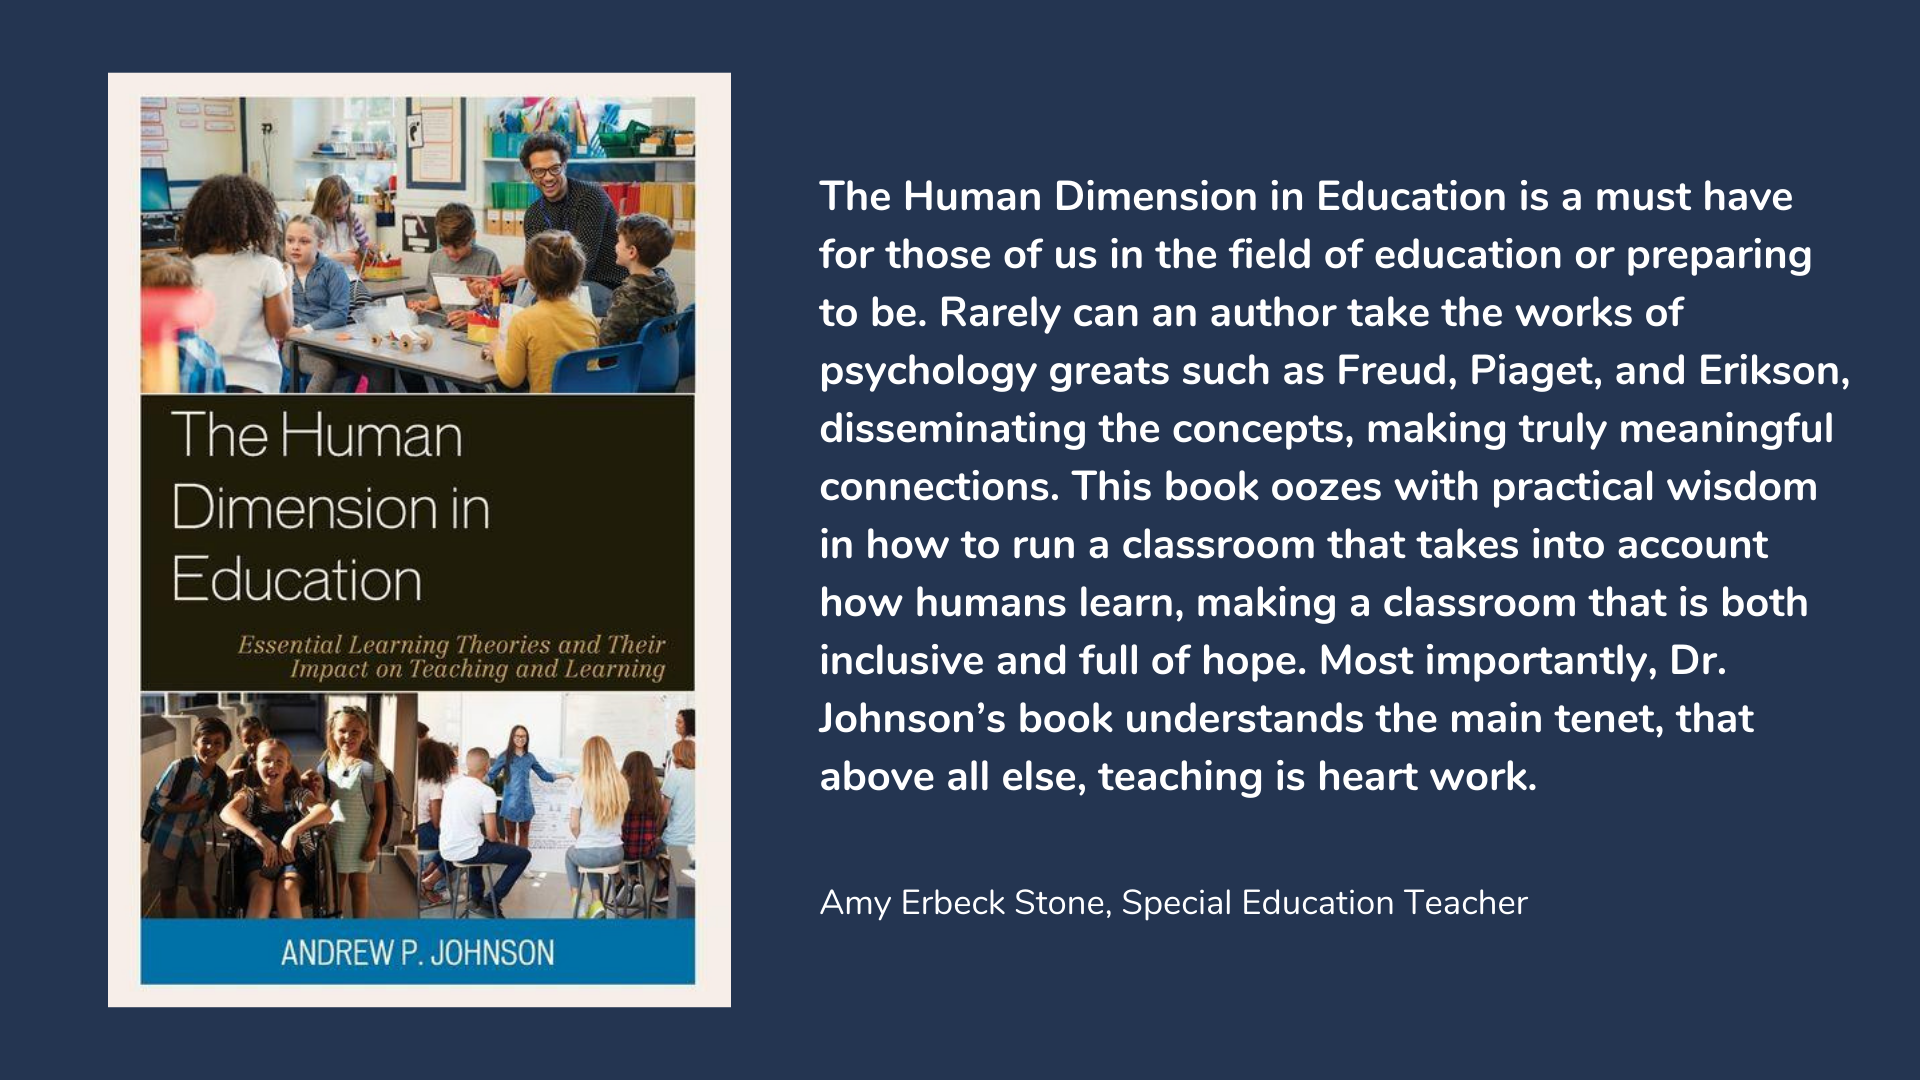 The Human Dimension in Education, book cover and description.